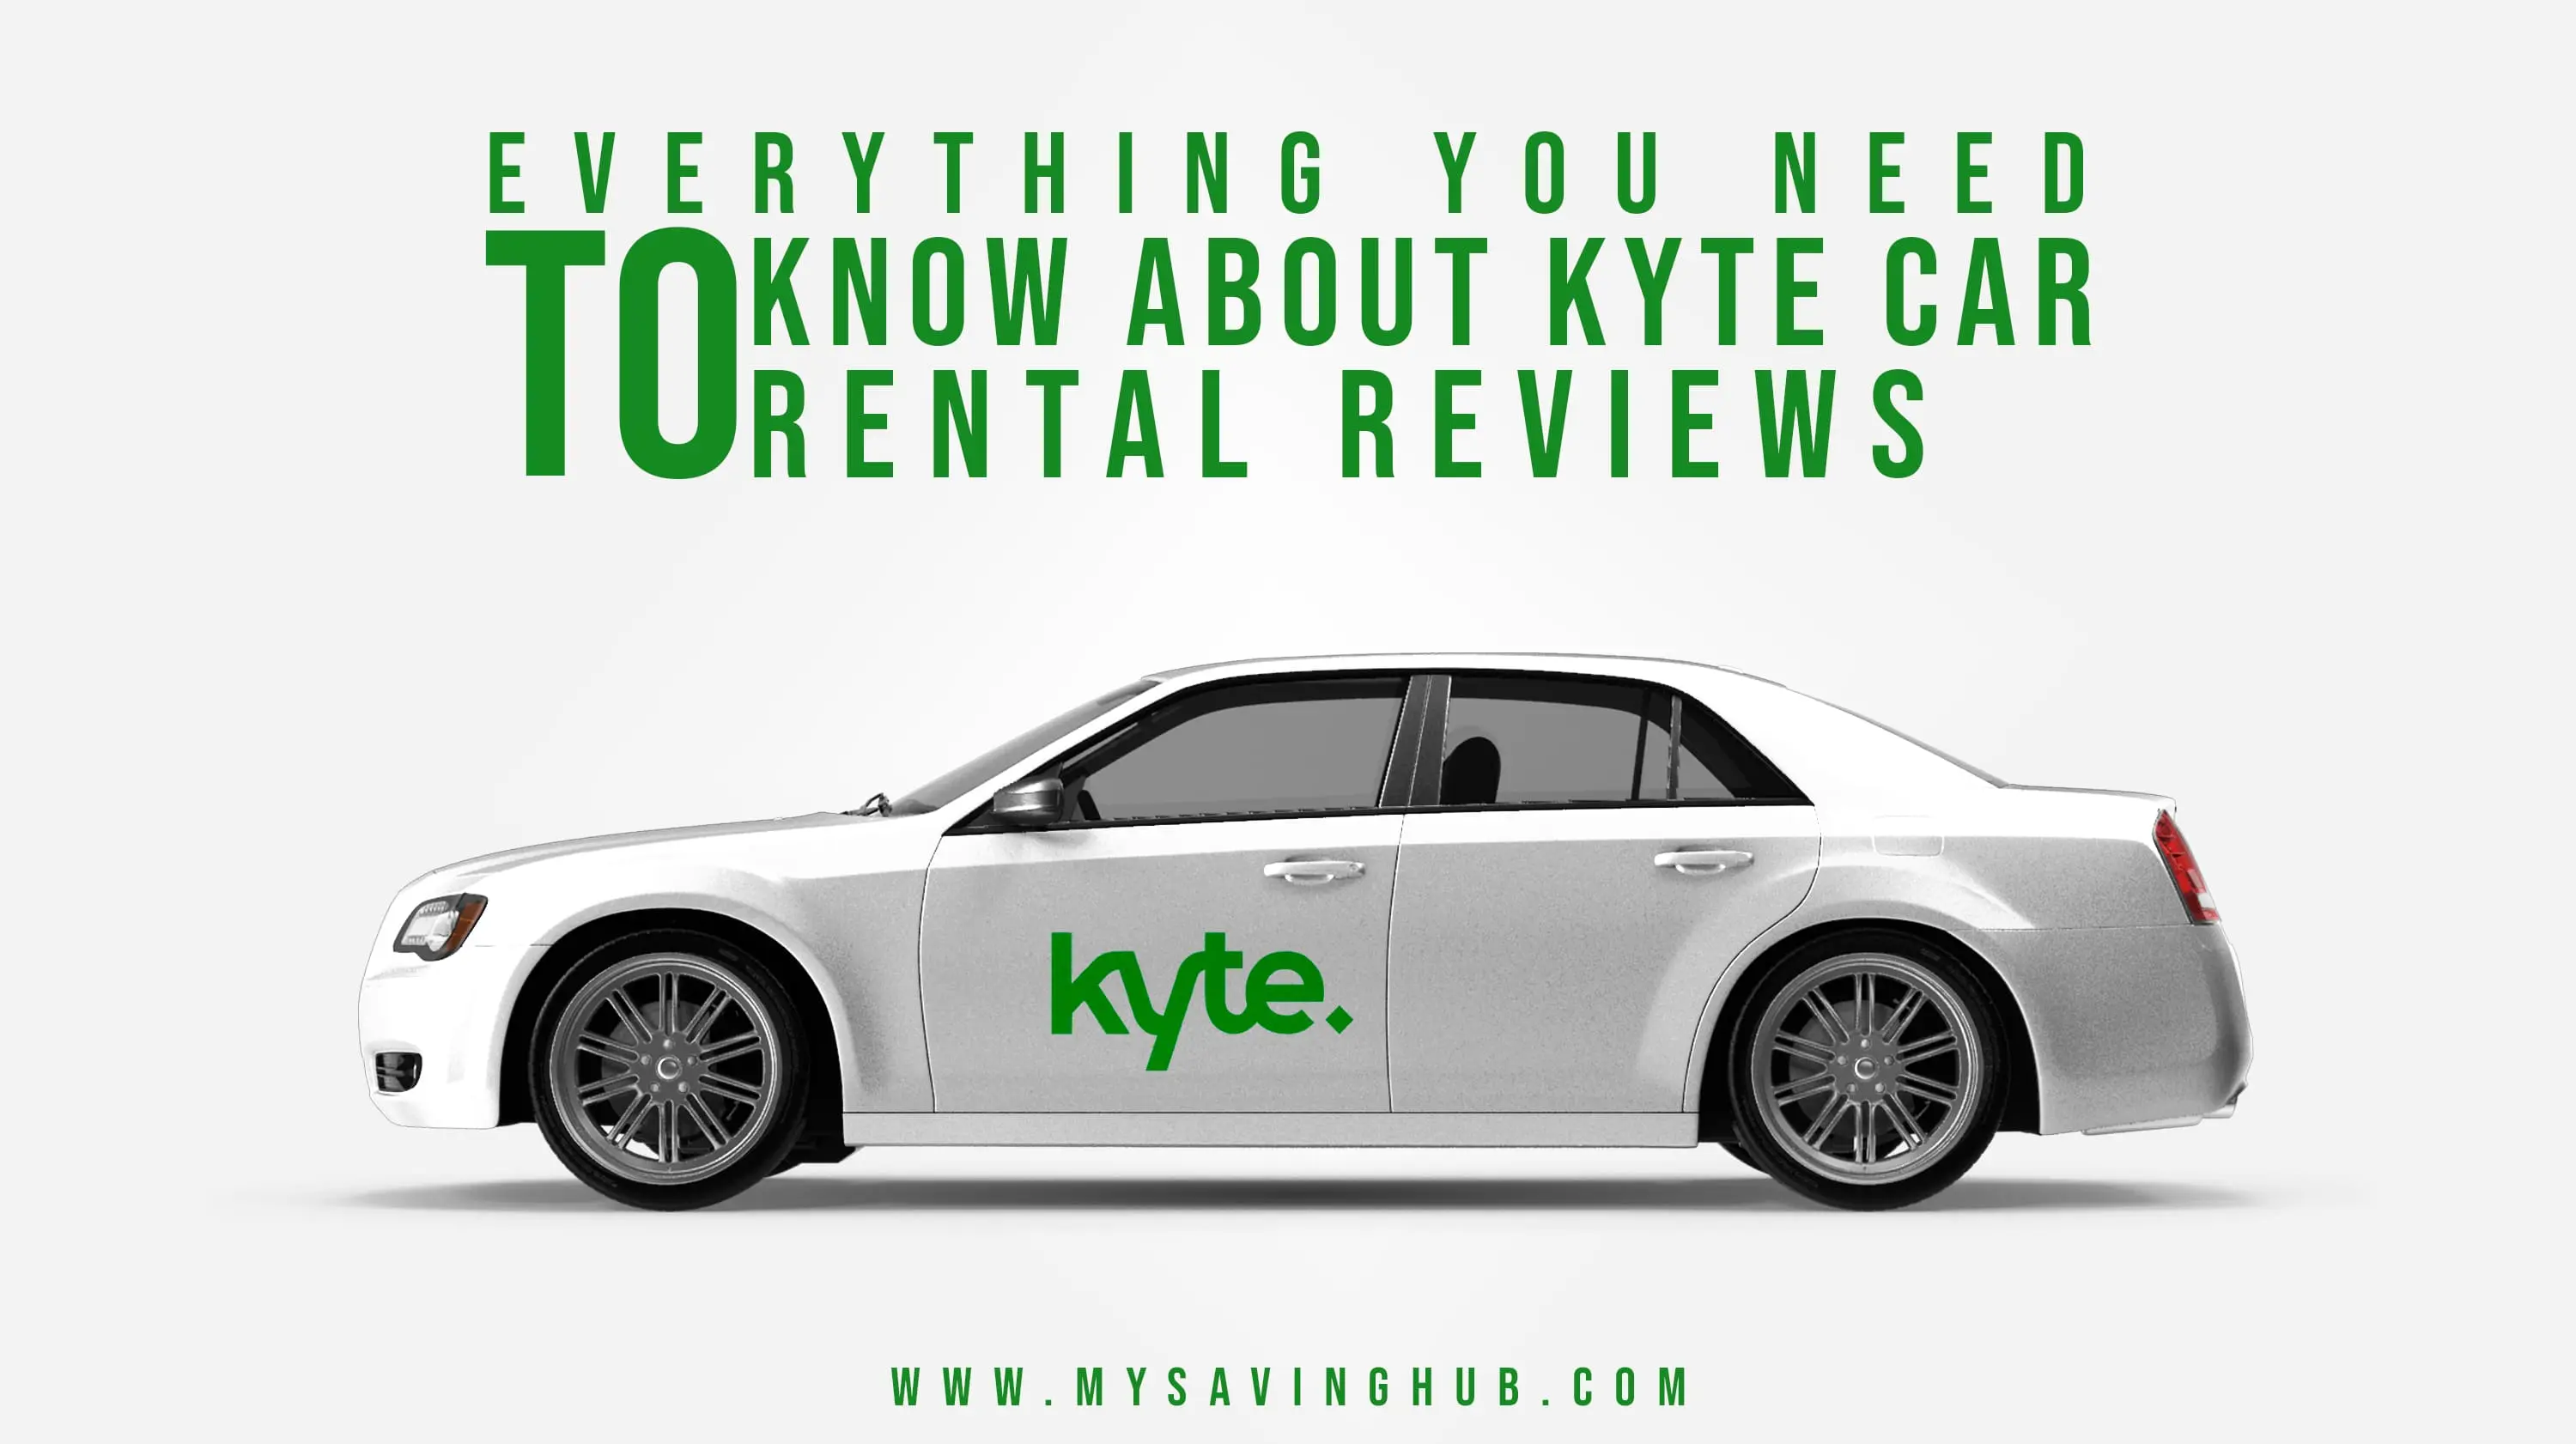 Everything You Need to Know About Kyte Car Rental Reviews